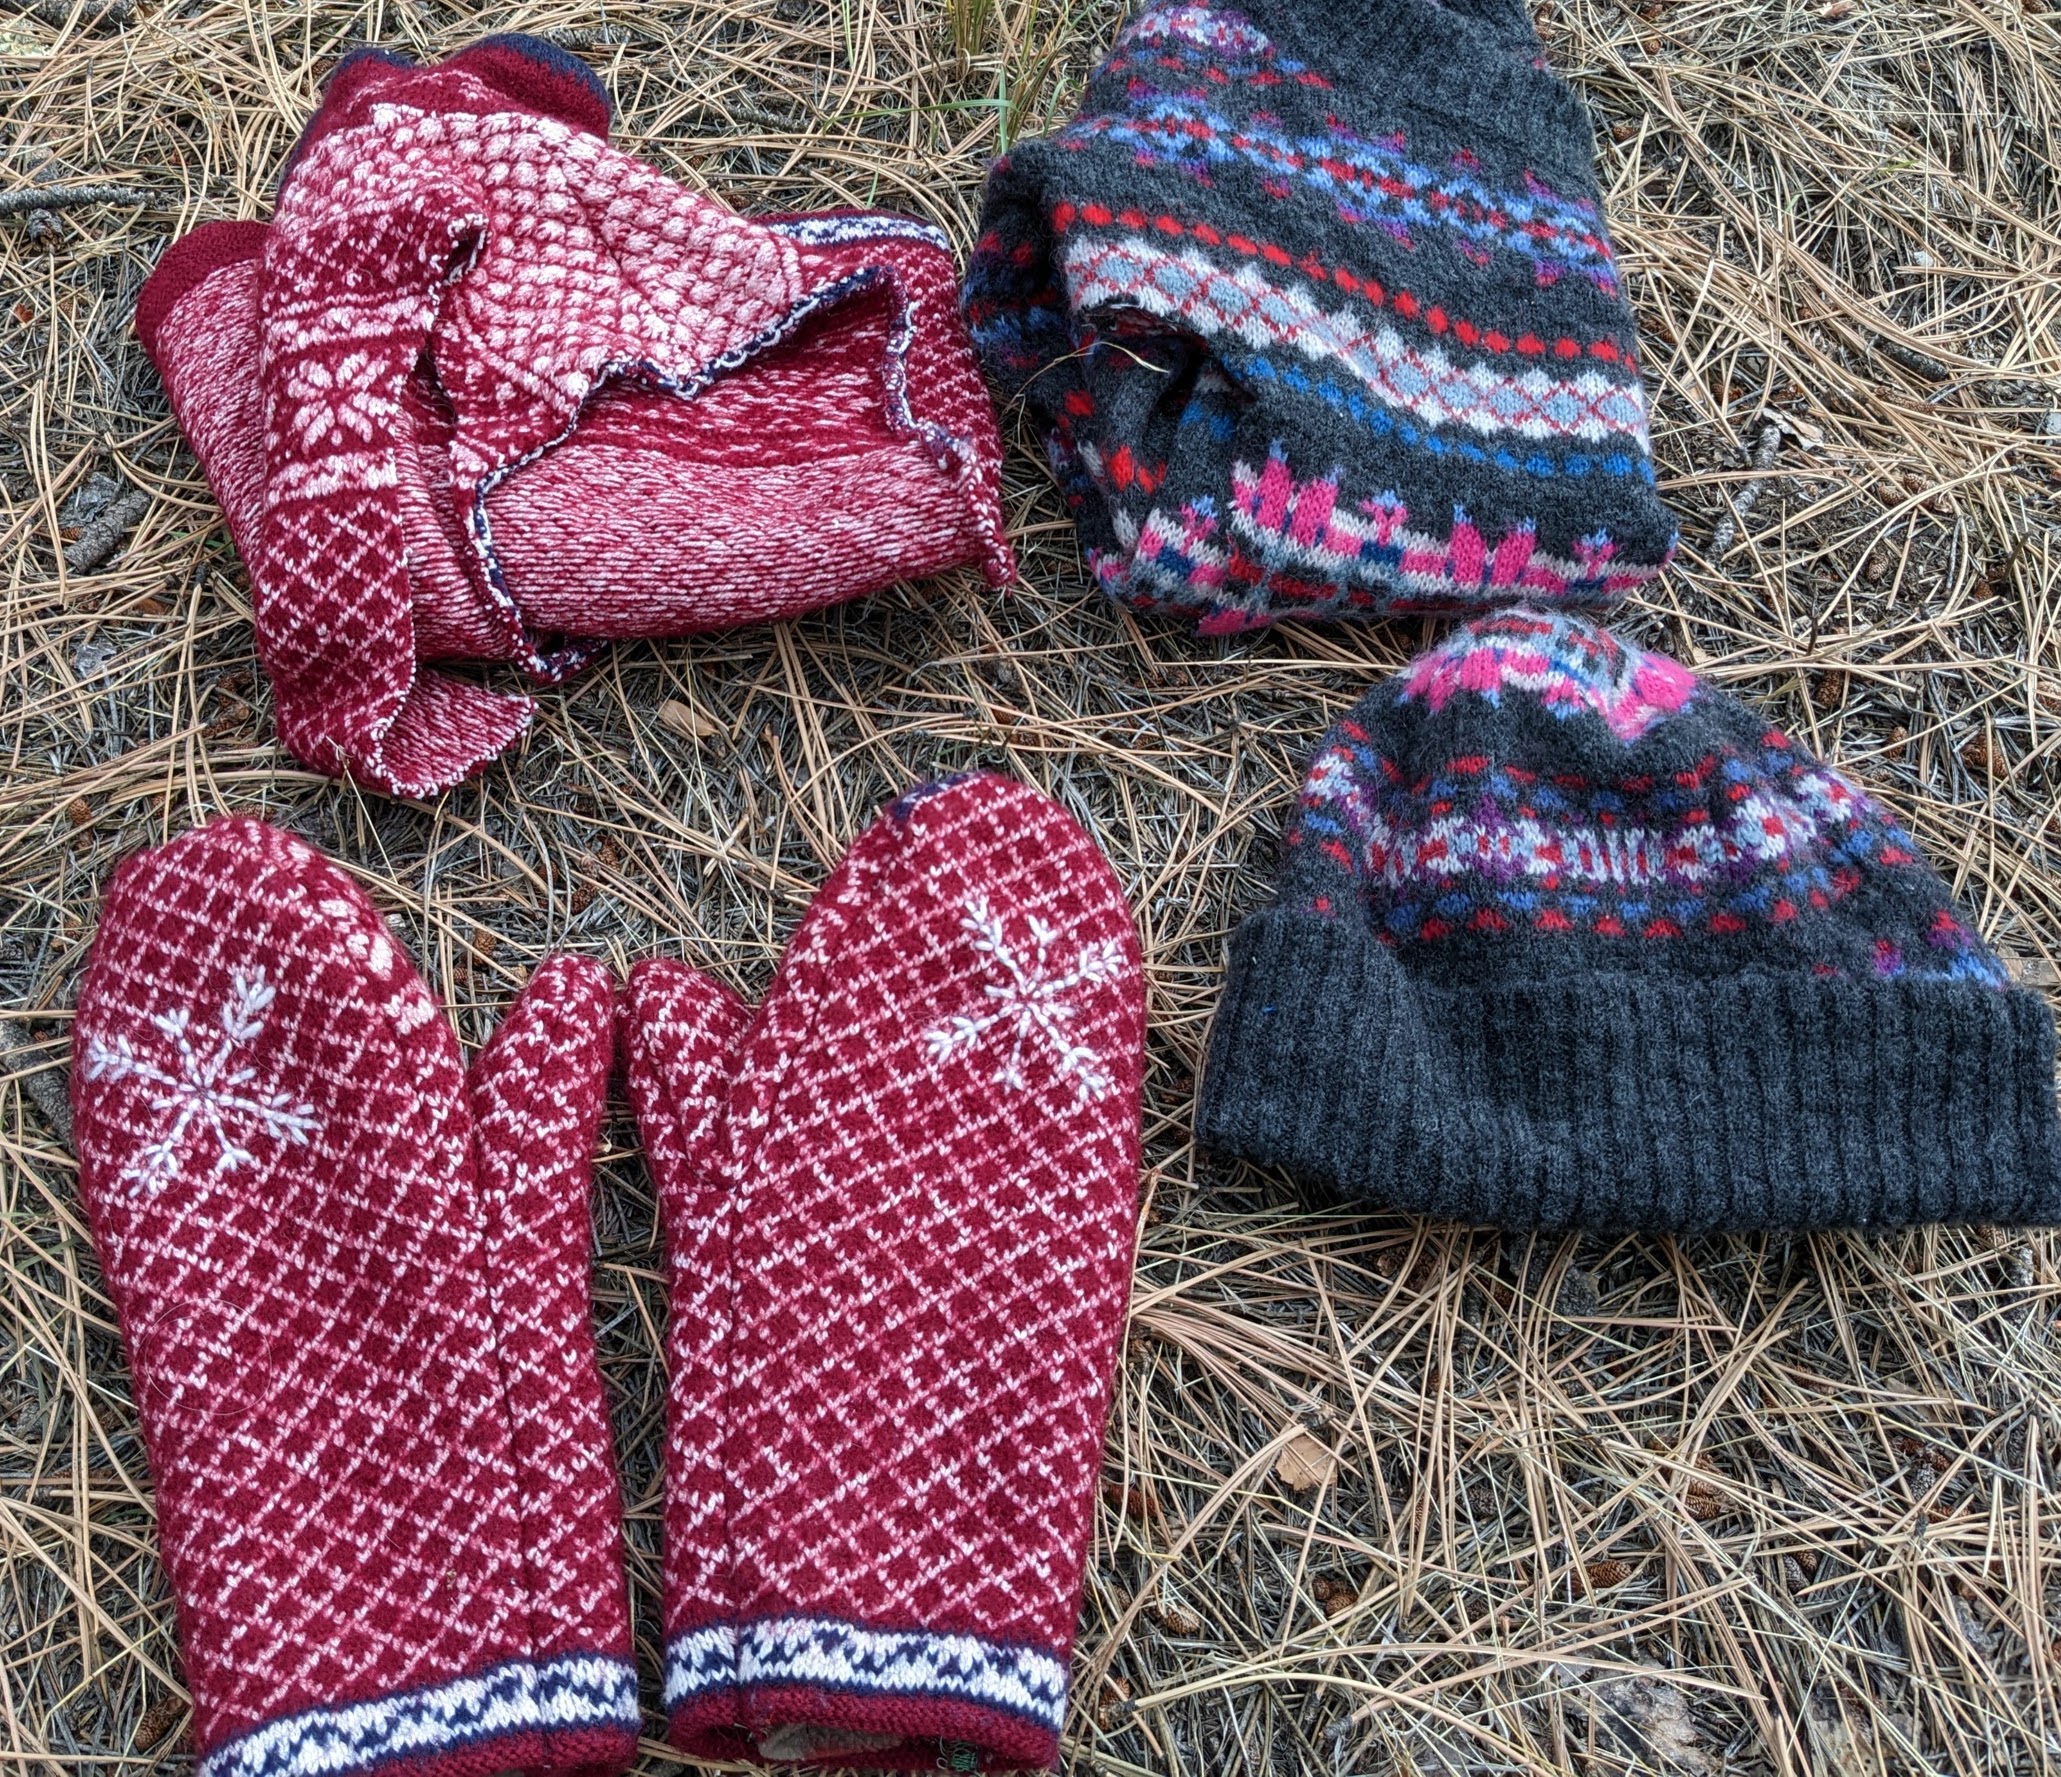 Shrunken or thrifted sweaters turned mitts and hat!